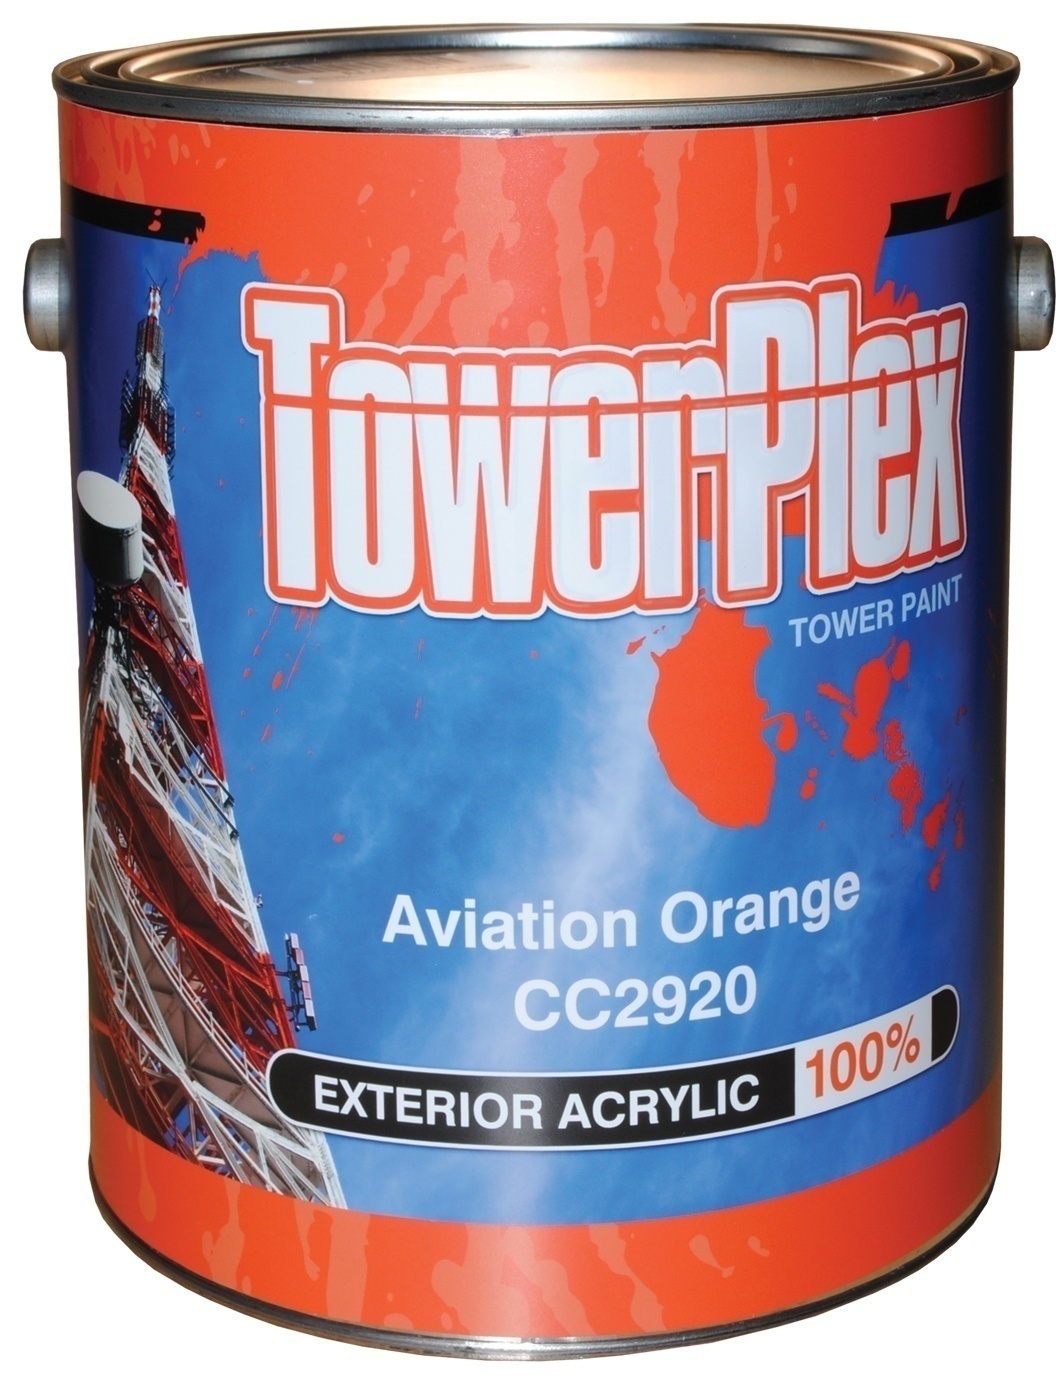 CC2920 TowerPlex Aviation Orange Tower Paint (5 Gallons) from Columbia Safety